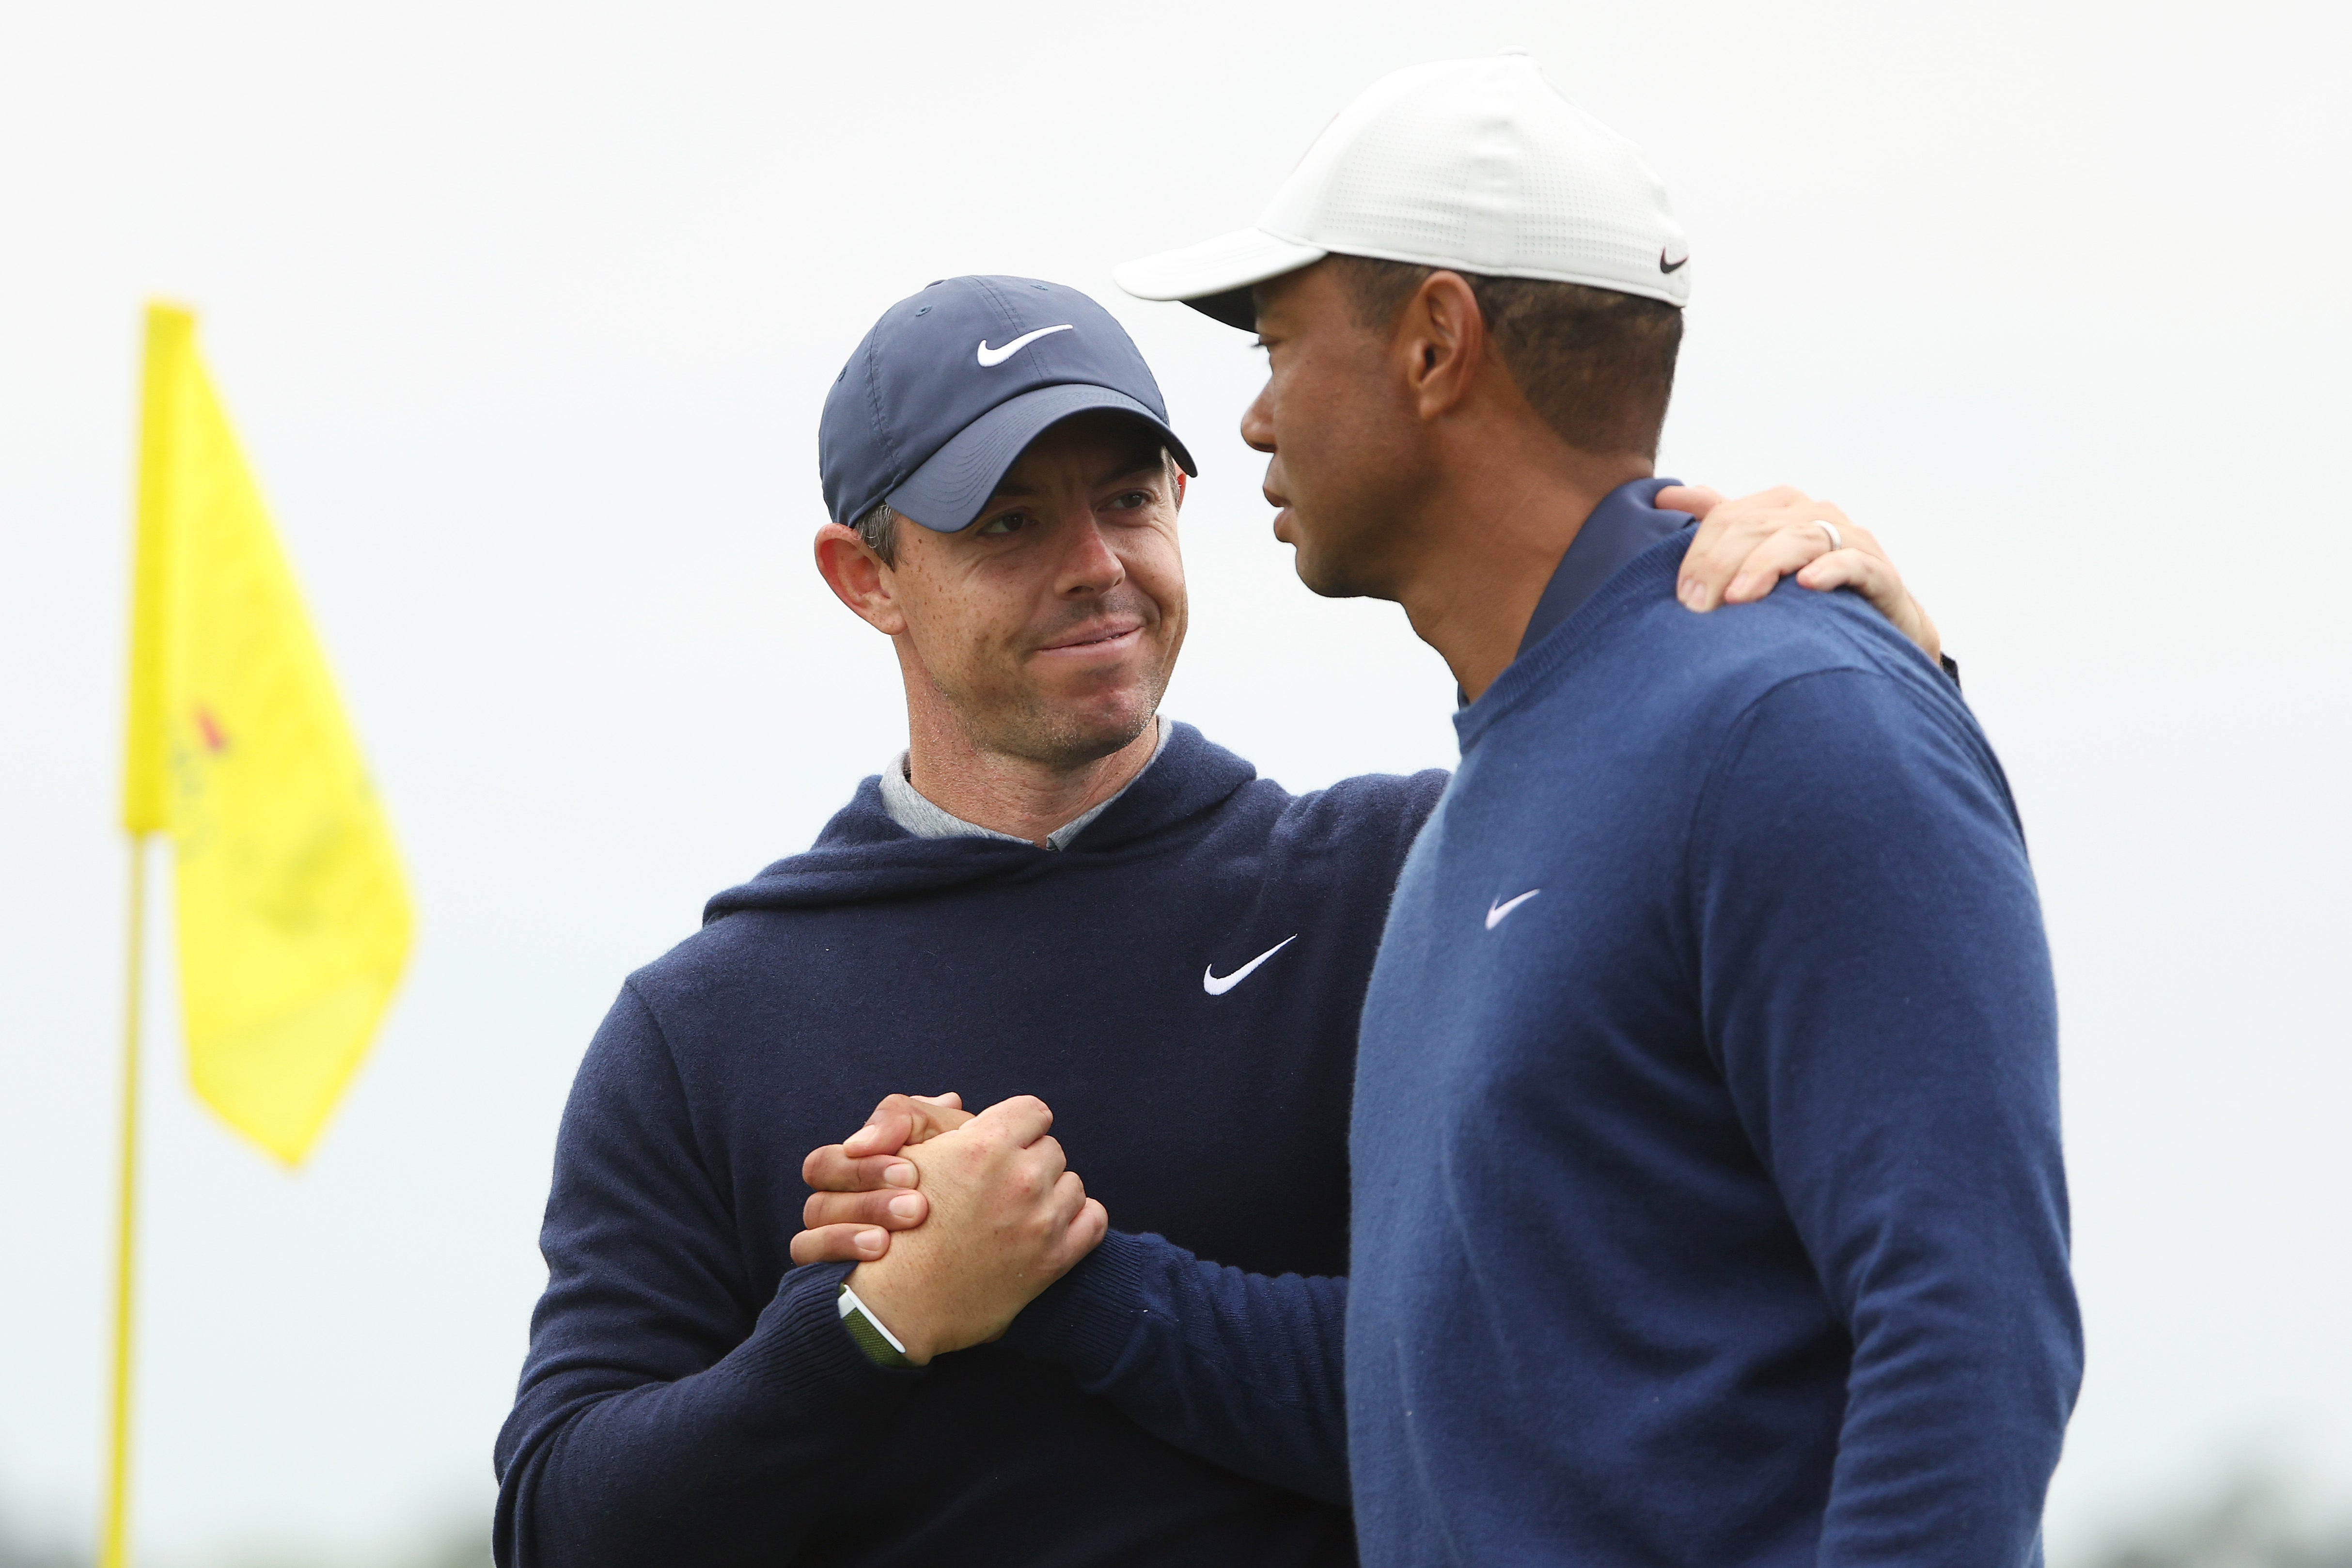 Rory McIlroy will try to ignore hostilities between the PGA Tour and the Saudi Arabia-backed LIV Golf as he attempt to finally win the Masters